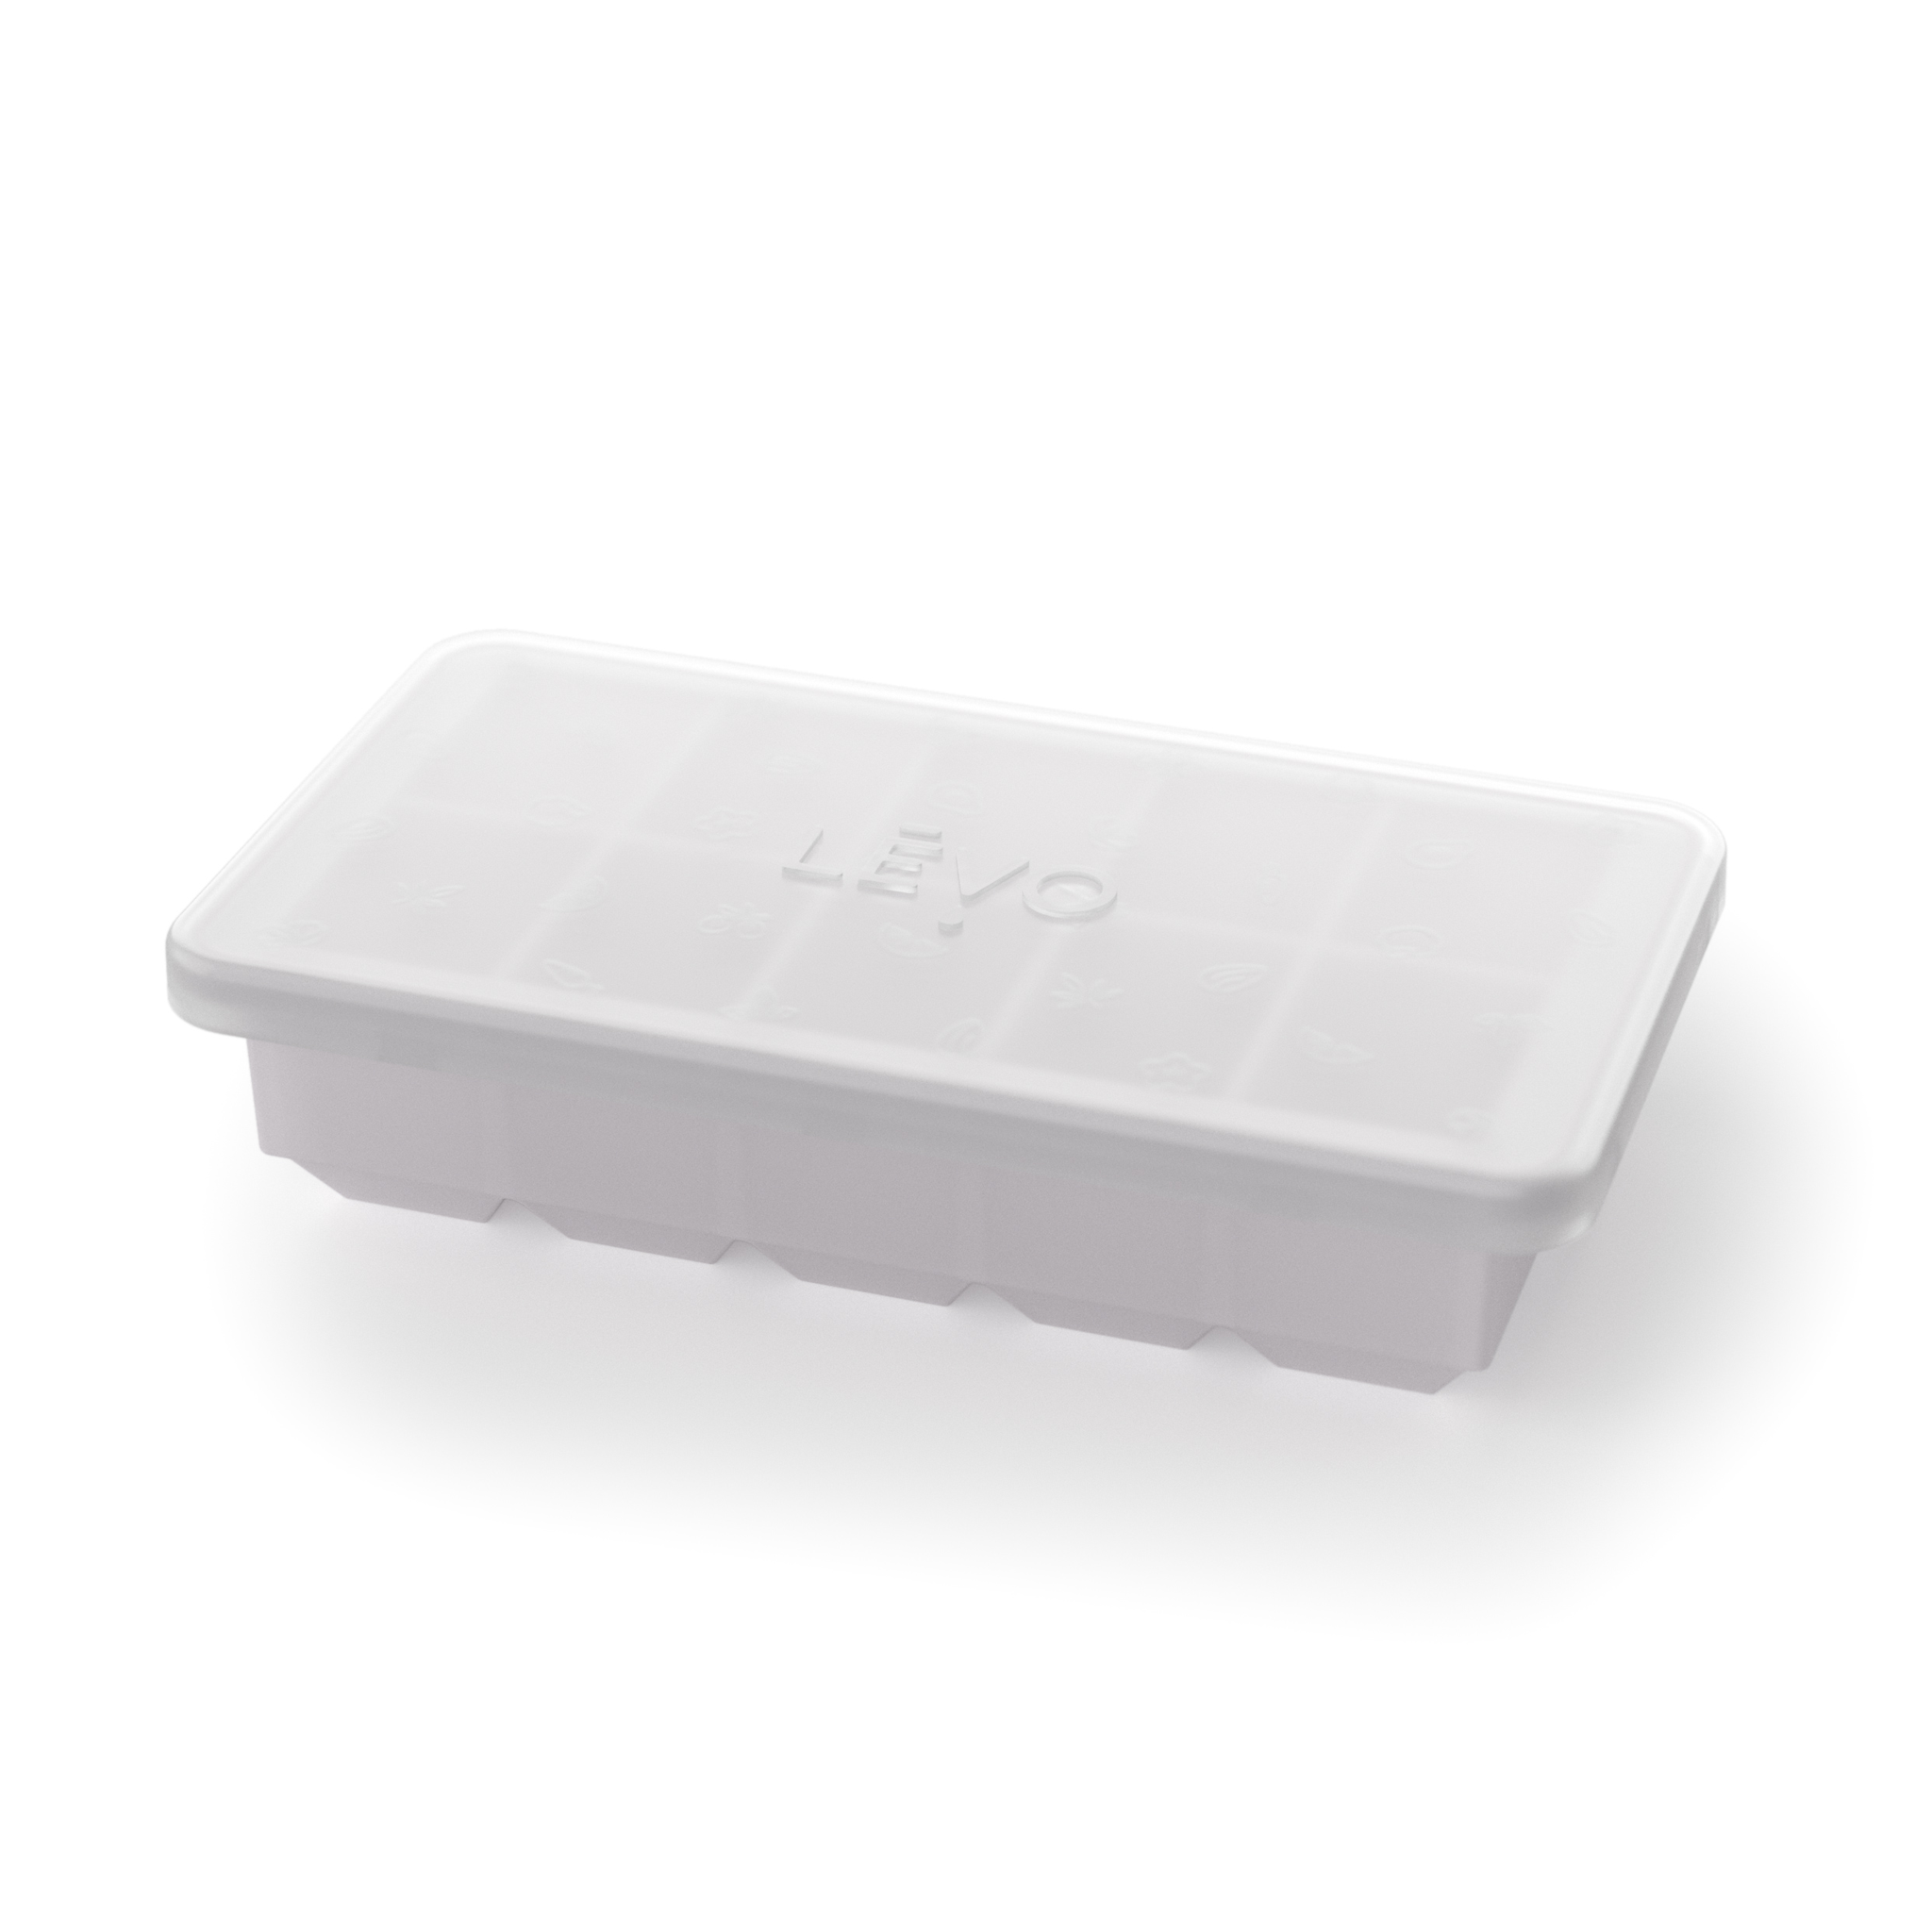 LEVO Herb Block Trays come in 4 colors and make it easy to store and freeze your creations!